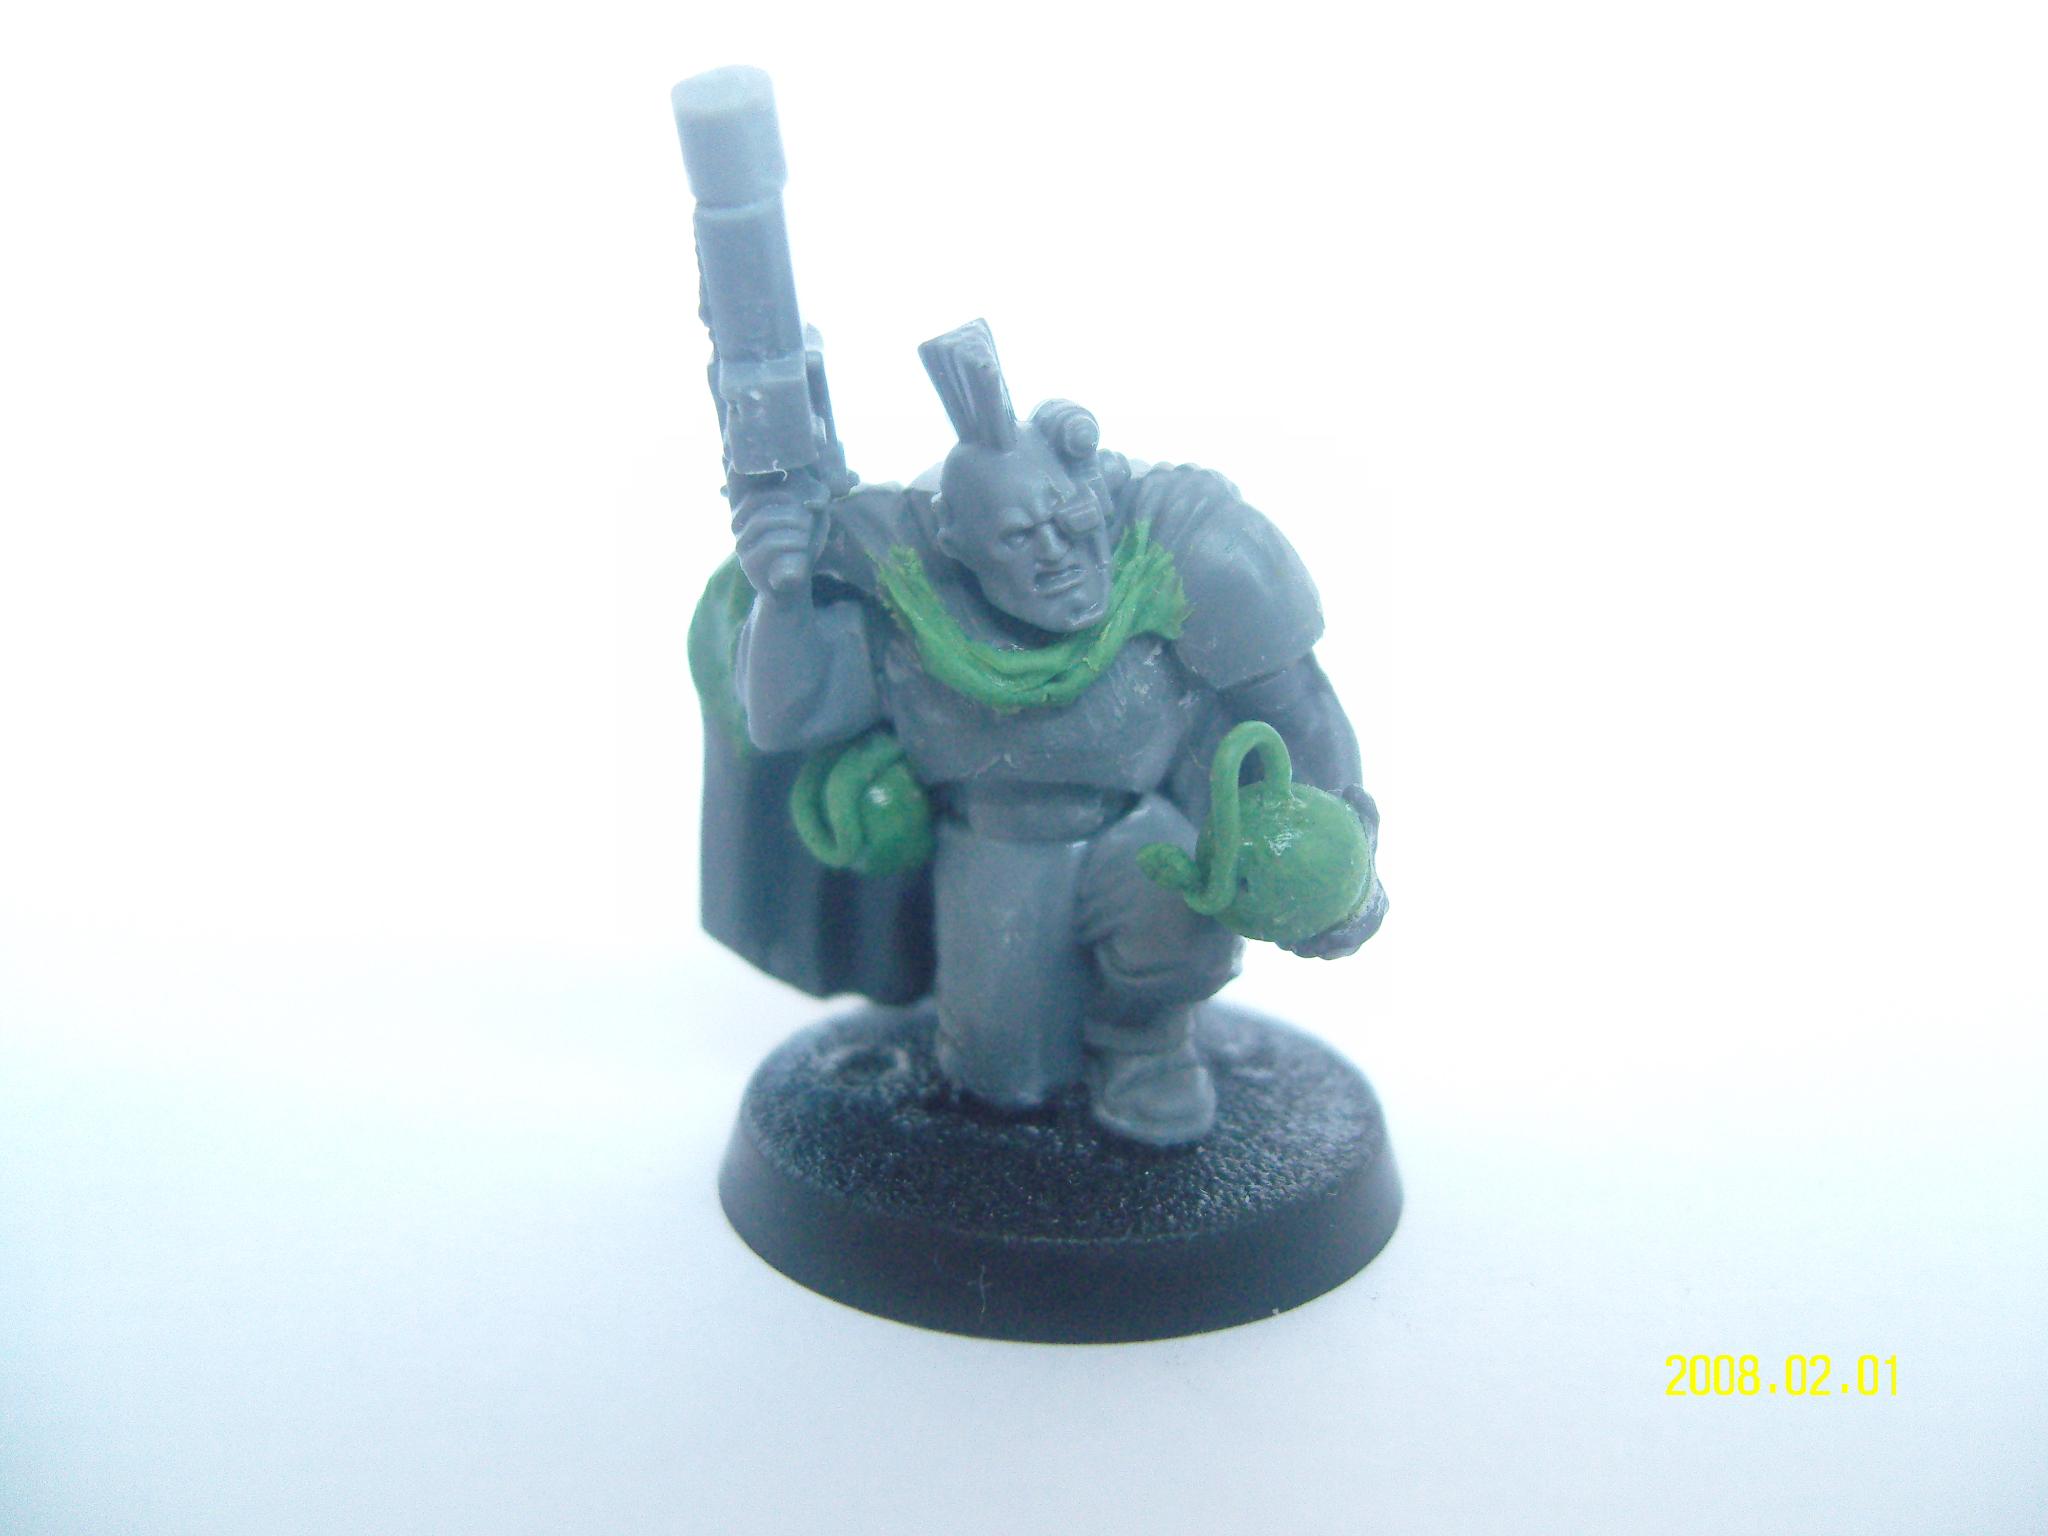 and finally my marbo conversion. ( i thought i'd give him an old style acme bomb as it fits his fluff as a looney tune)